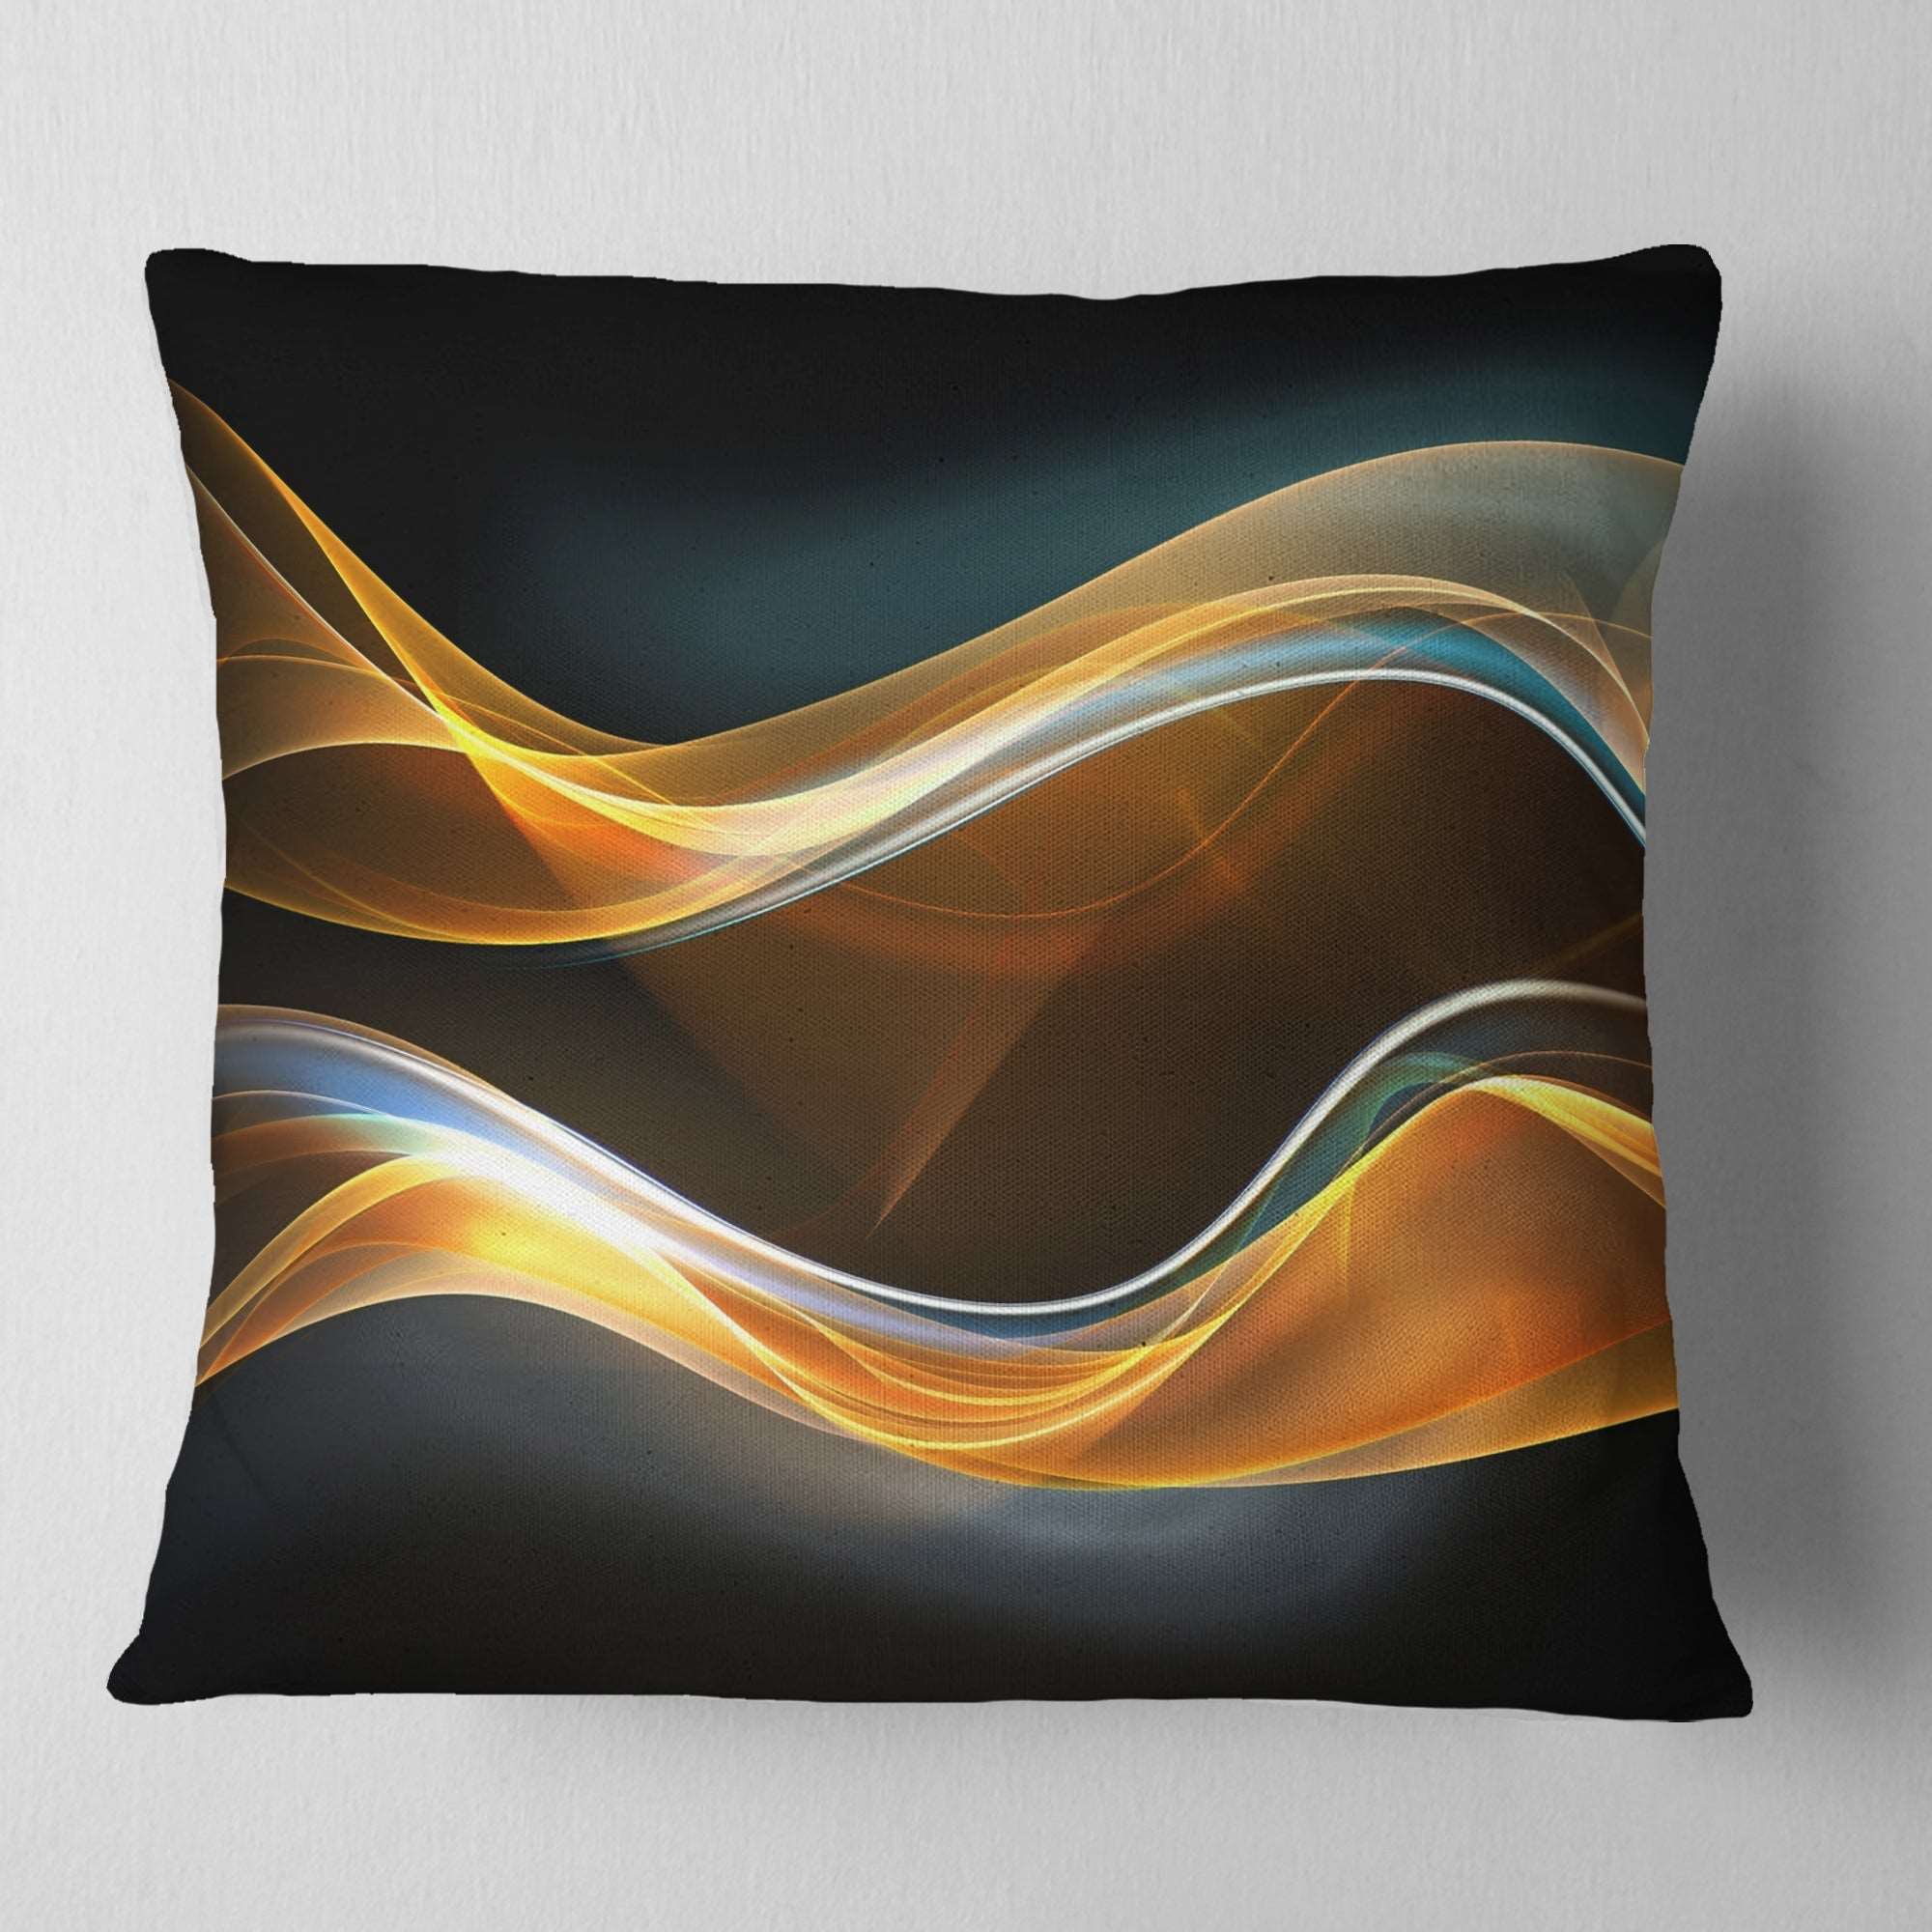 3D Gold Waves in Black - Abstract Throw Pillow